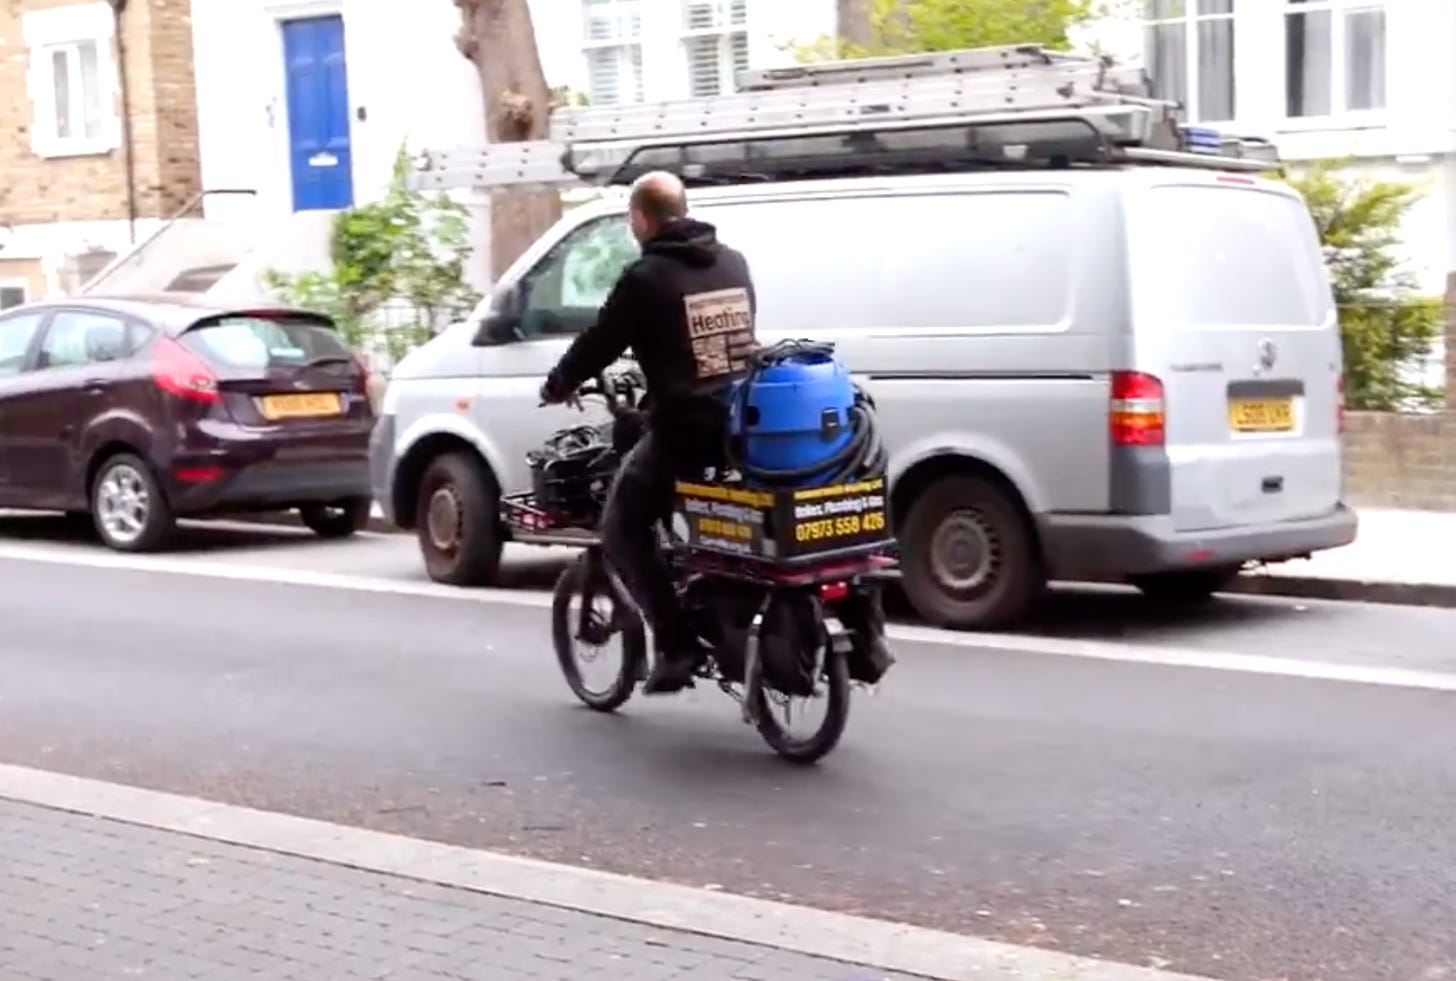 A man cycles away from the camera on a small electric cargobike. On the back of the bike is  perches a vaccum cleaner used for his work. There is signage on the side of the bike advertising his business. 